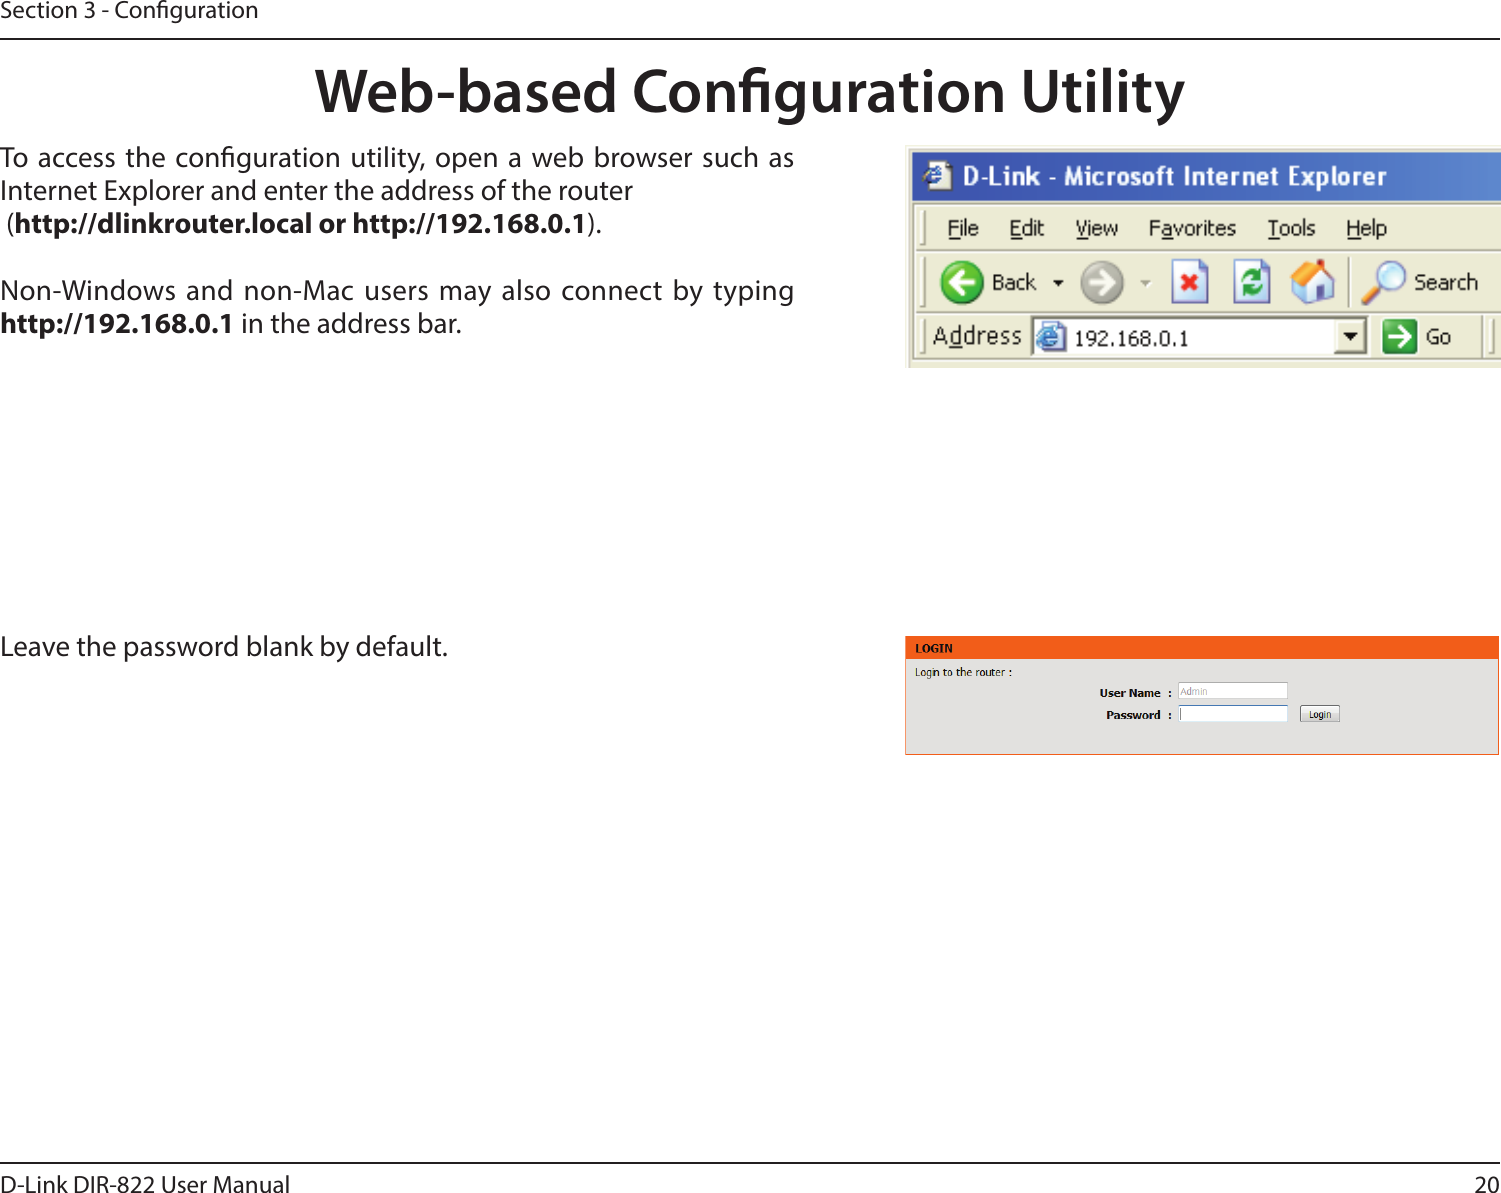 20D-Link DIR-822 User ManualSection 3 - CongurationWeb-based Conguration UtilityLeave the password blank by default.To access the conguration utility, open a web browser such as Internet Explorer and enter the address of the router (http://dlinkrouter.localorhttp://192.168.0.1).Non-Windows and non-Mac users may also connect by typing http://192.168.0.1 in the address bar.